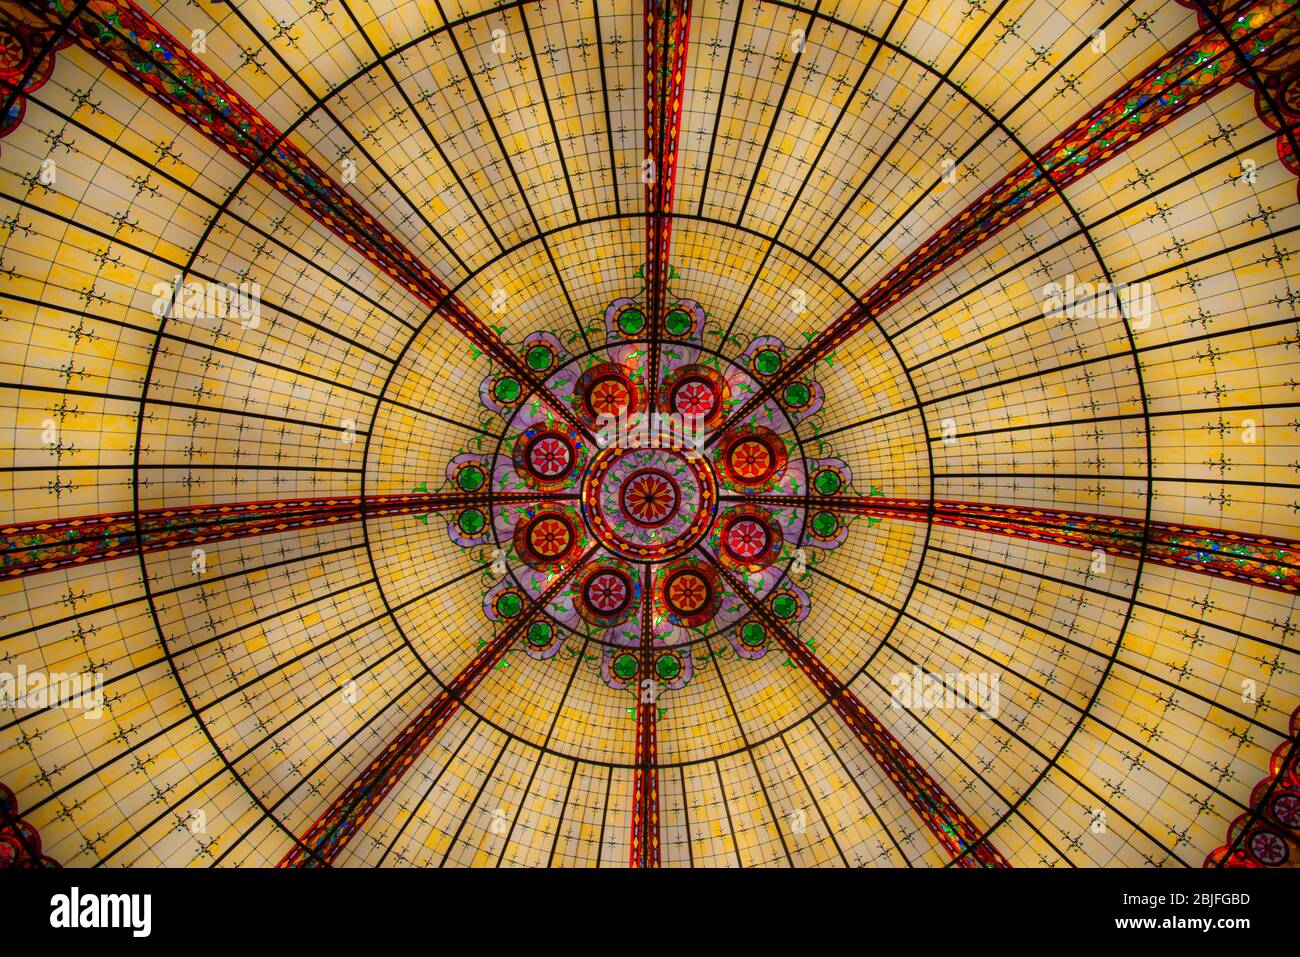 Stain Glass window in the dome of the Paris Casino in Las Vegas Stock Photo